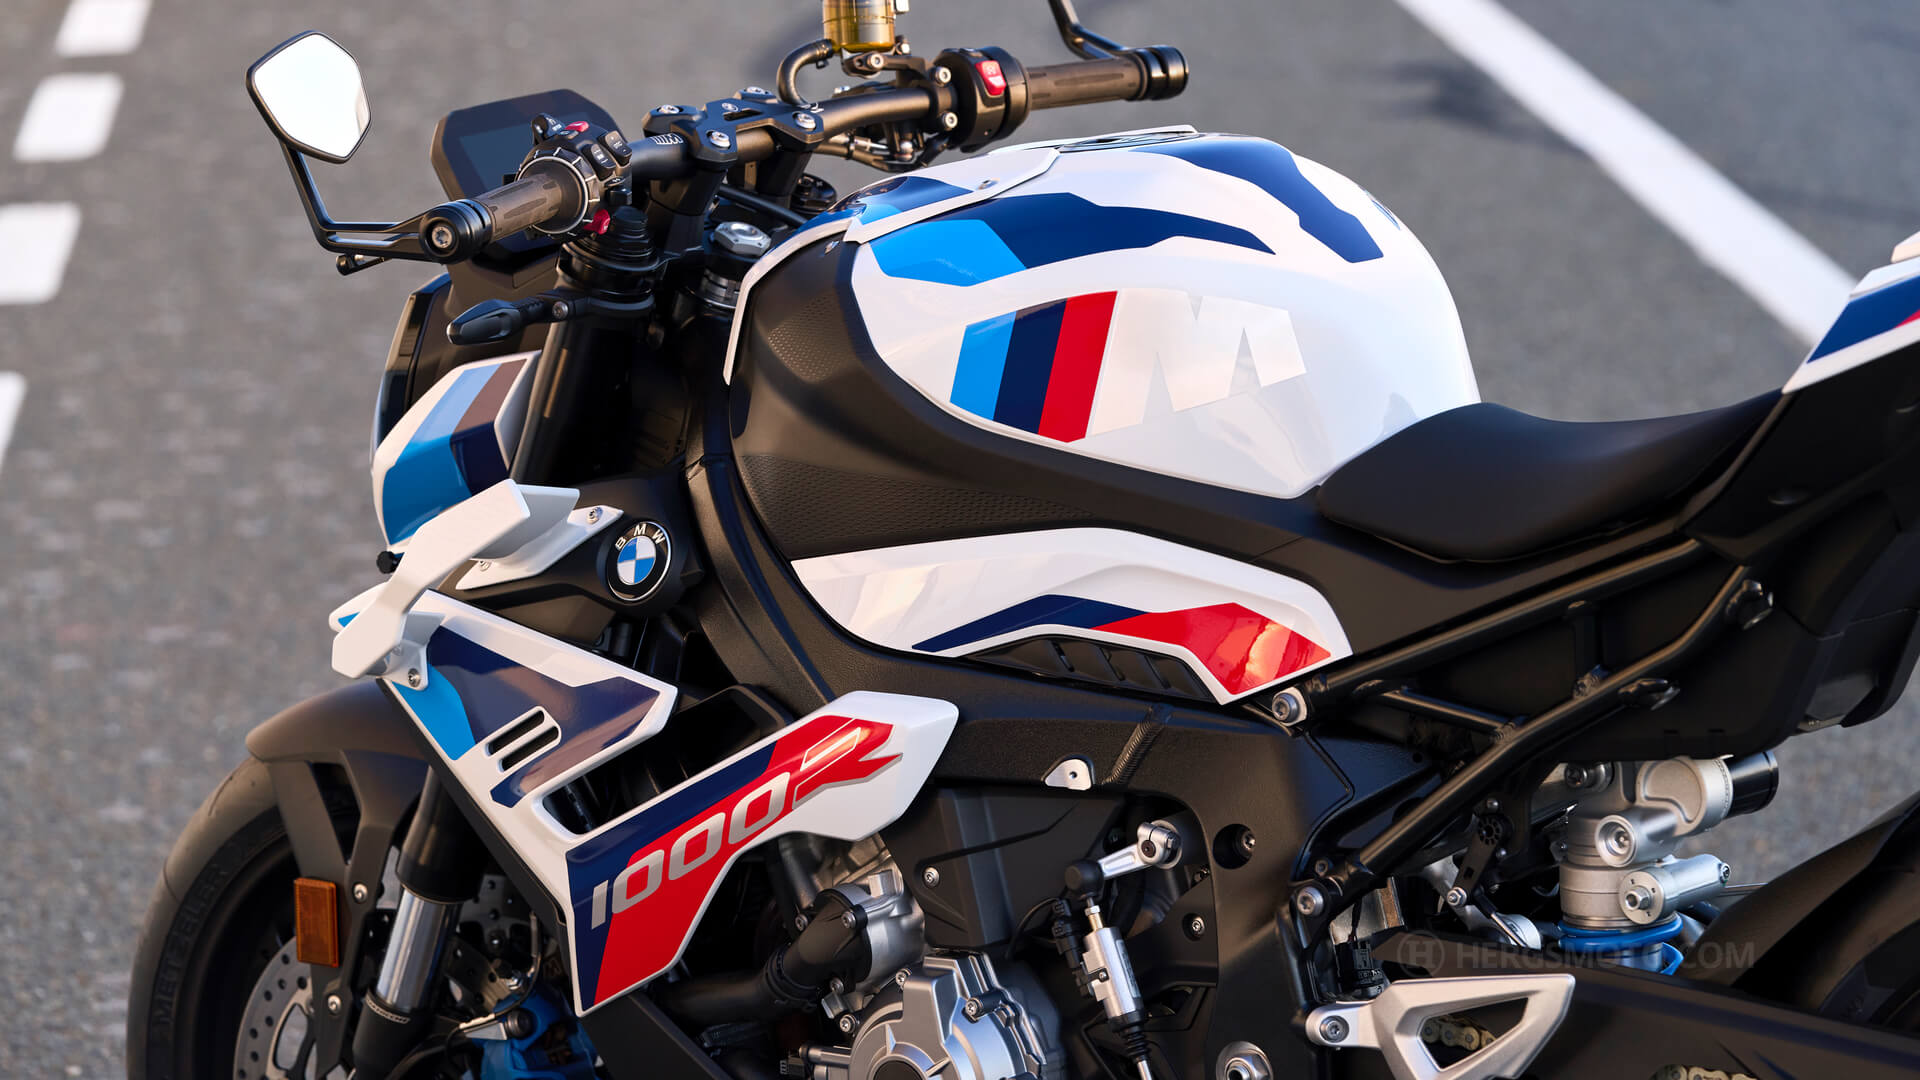 The M R is the second M model from BMW Motorrad.